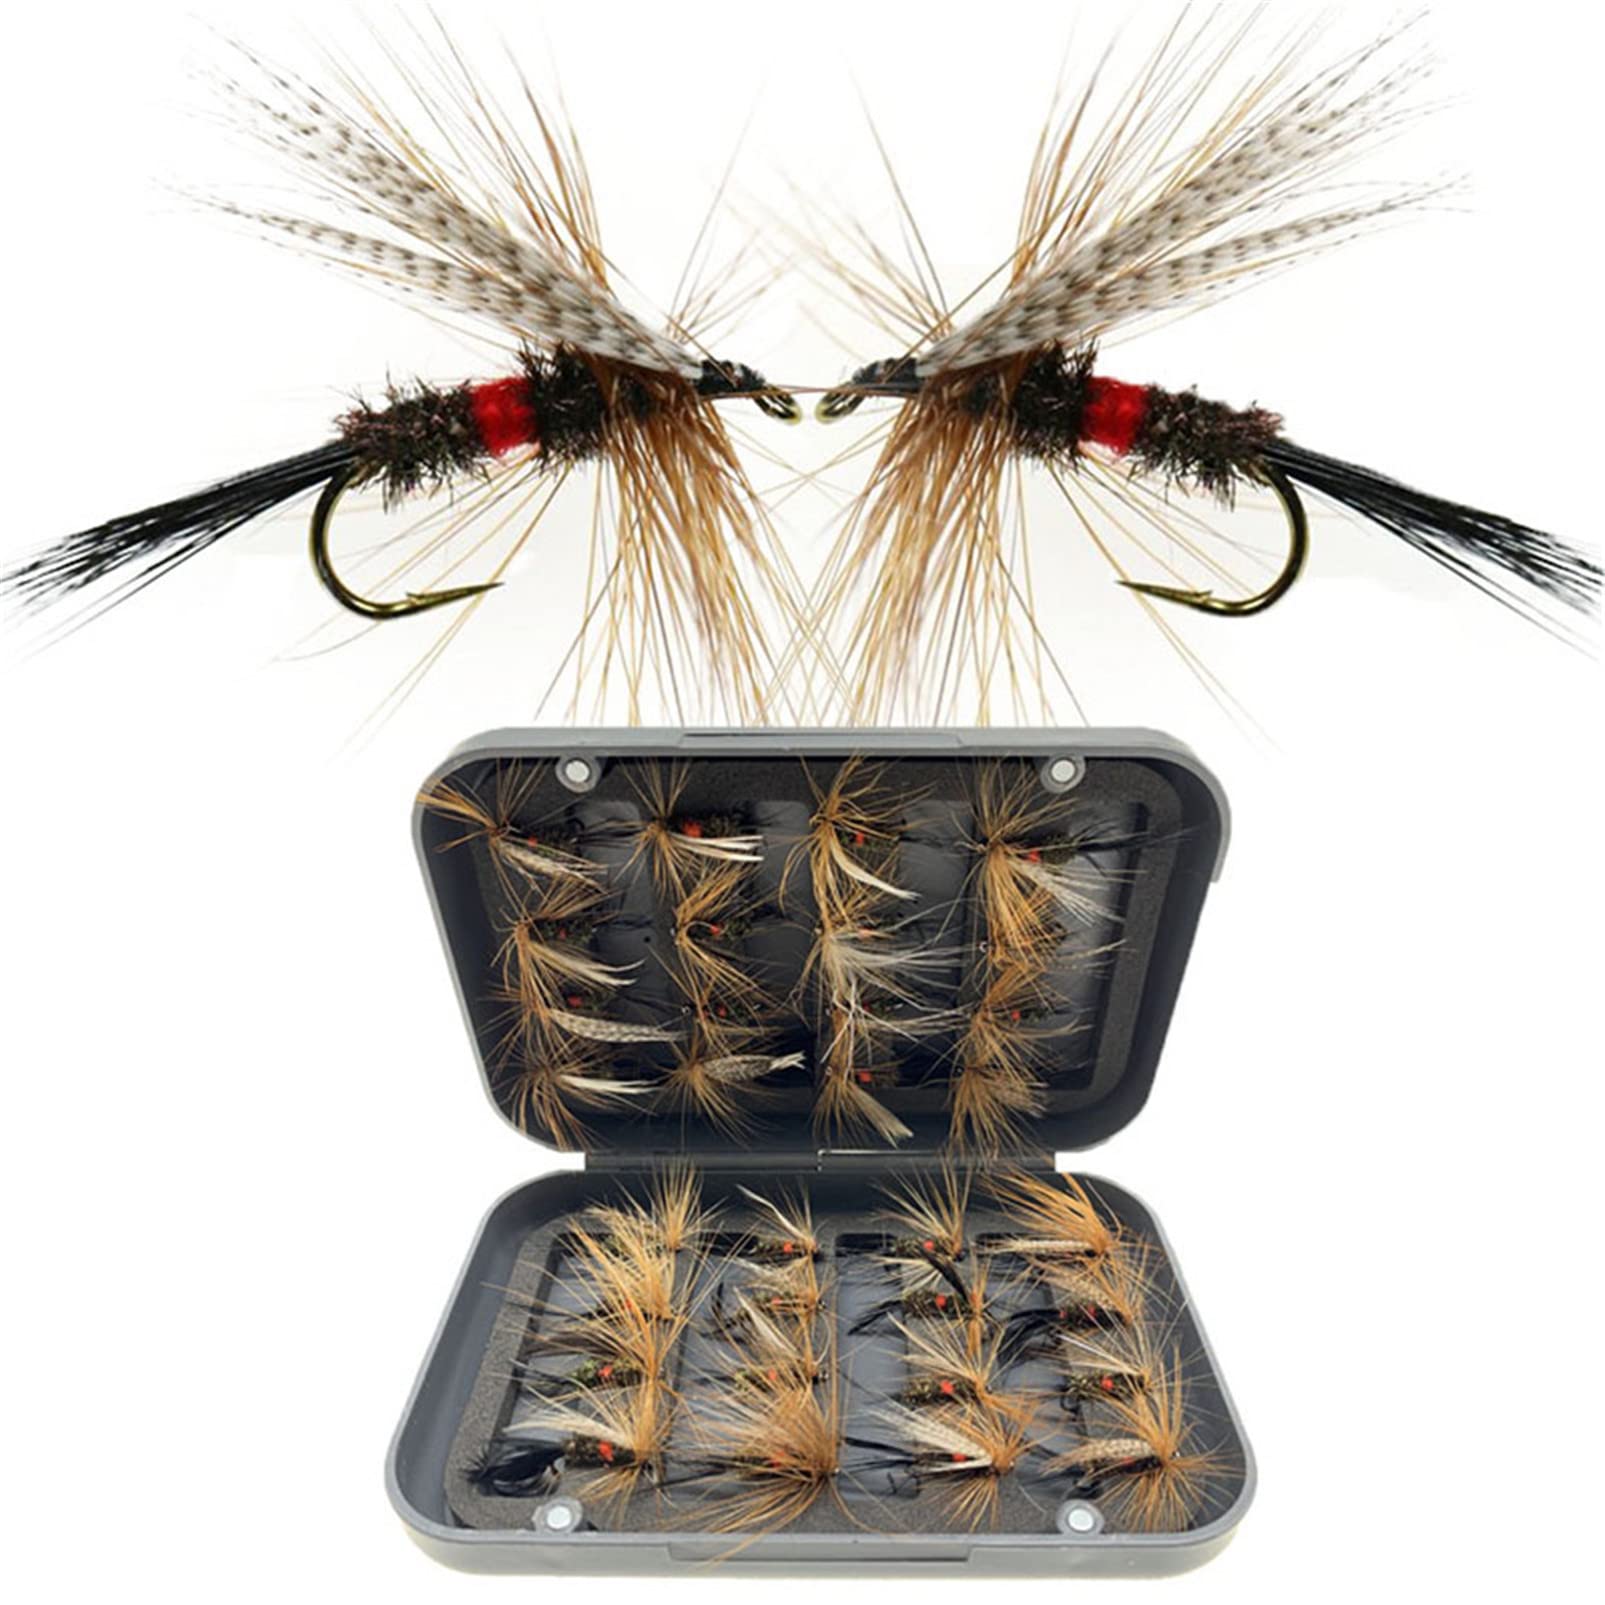 Dry Wet Nymph Fly Fishing Flies Collection With Box Trout Buggs Lures,  Streamers, And Flyfishing Kits From Xuan09, $14.09